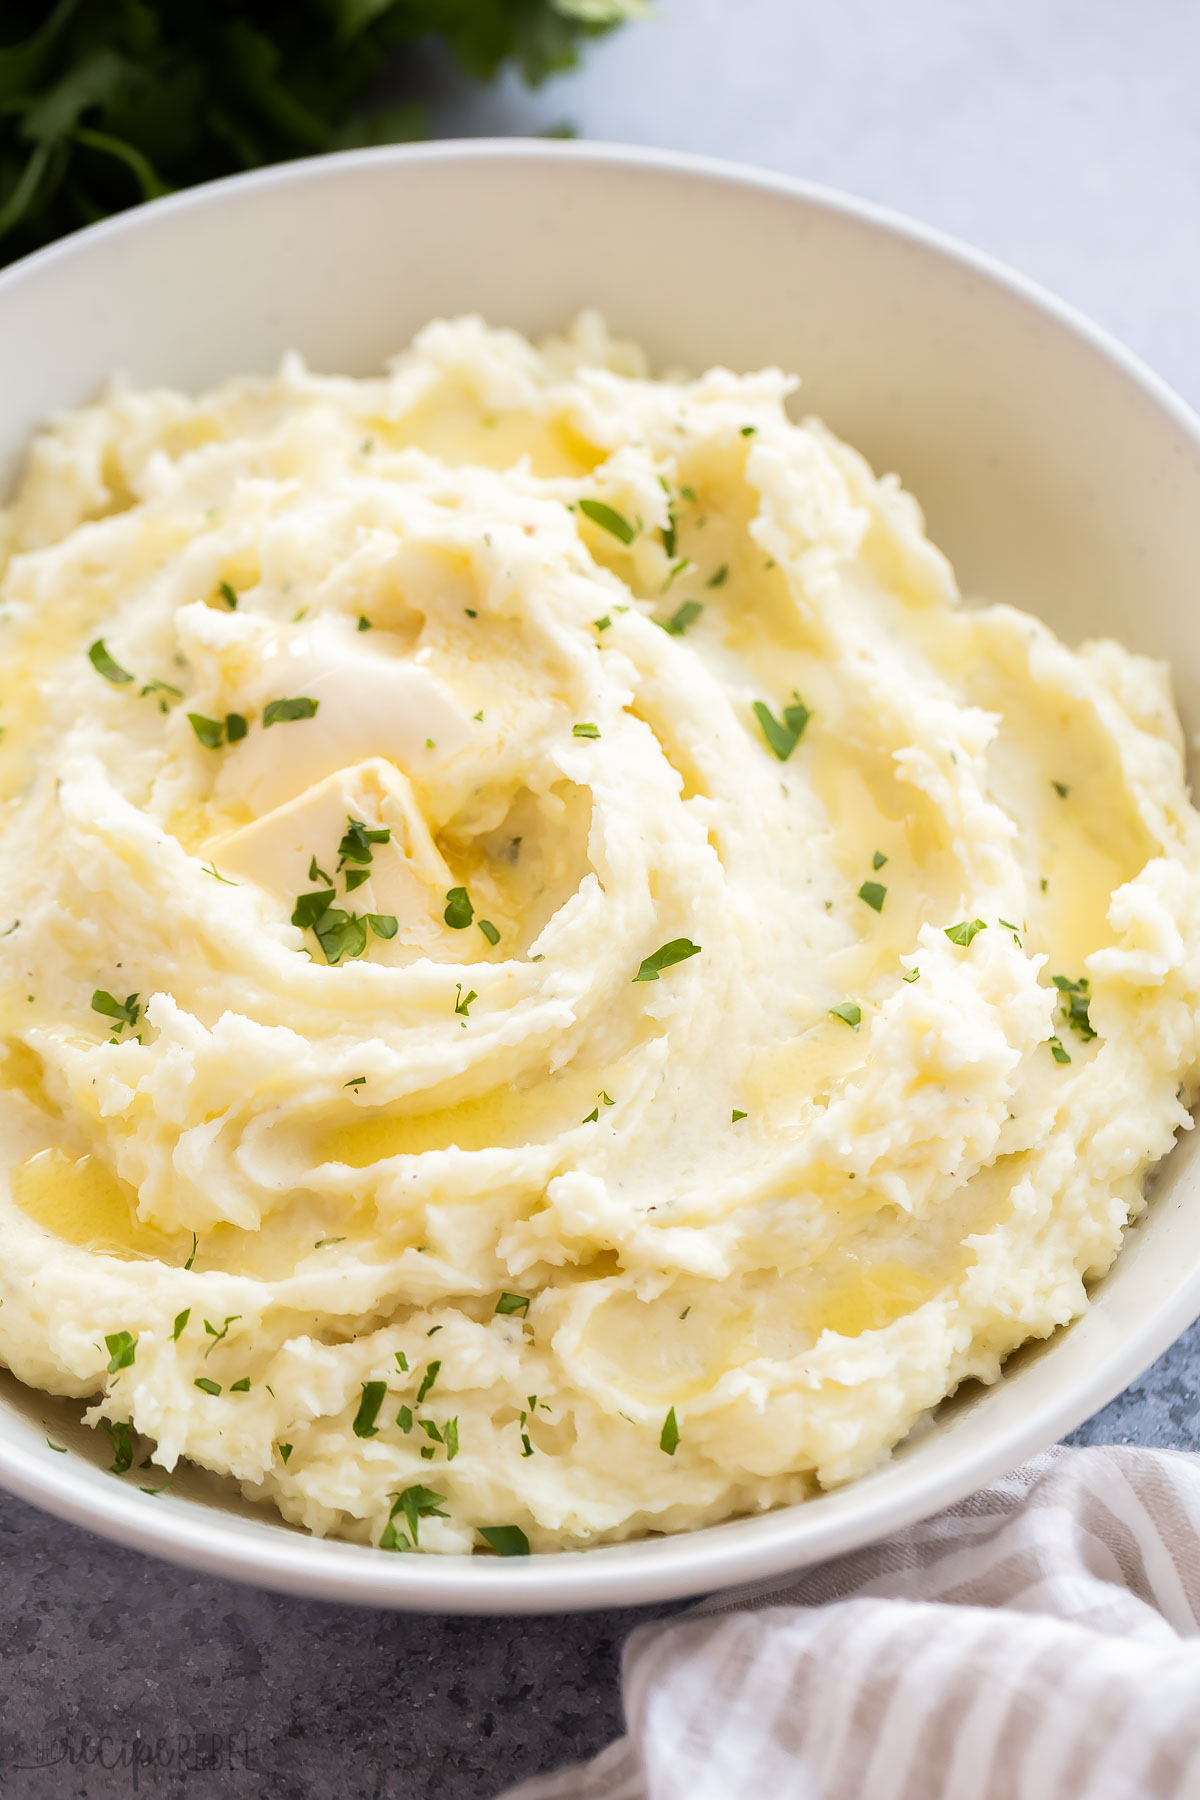 mashed potatoes spread in bowl with melted butter and parsley.